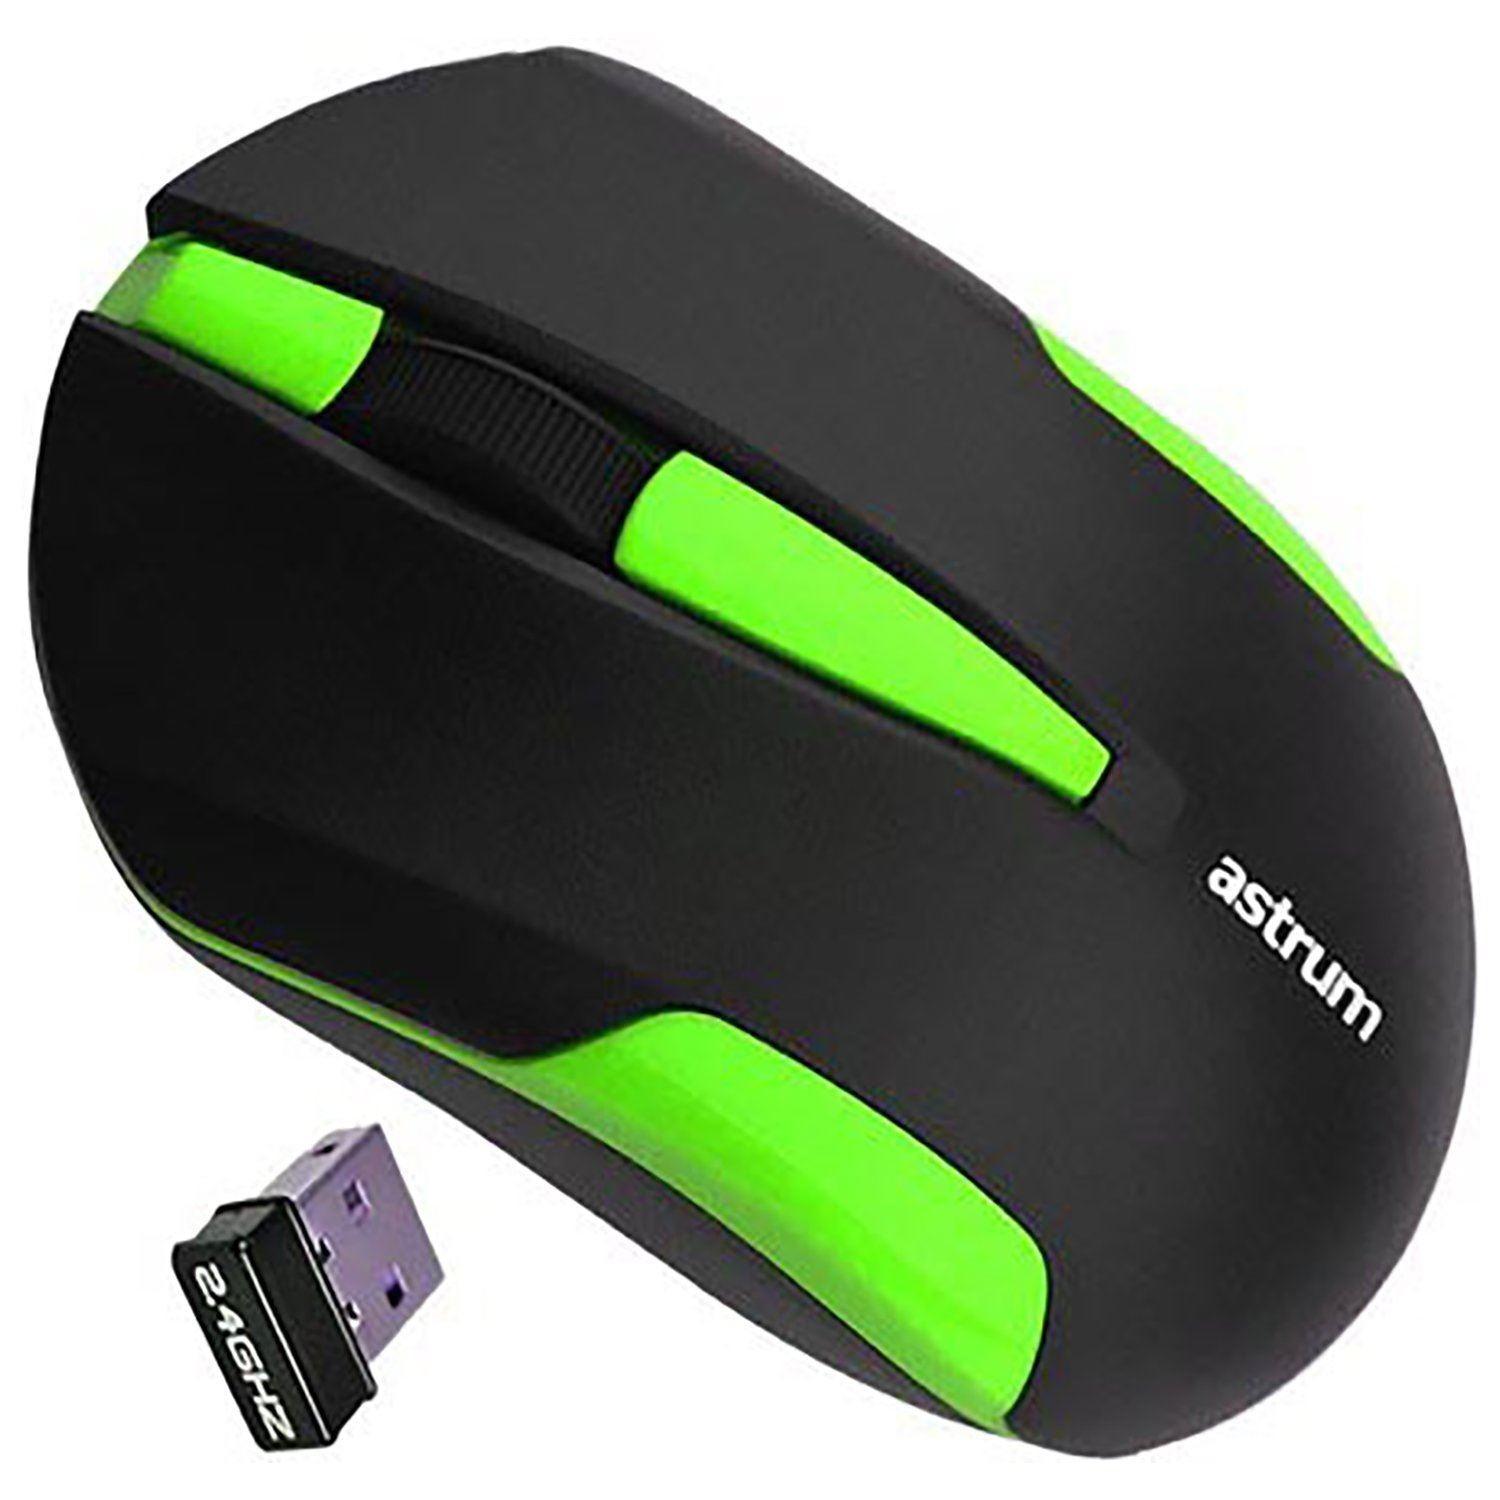 ASTRUM OPTICAL WIRELESS MOUSE 2.4GHZ - NeonSales